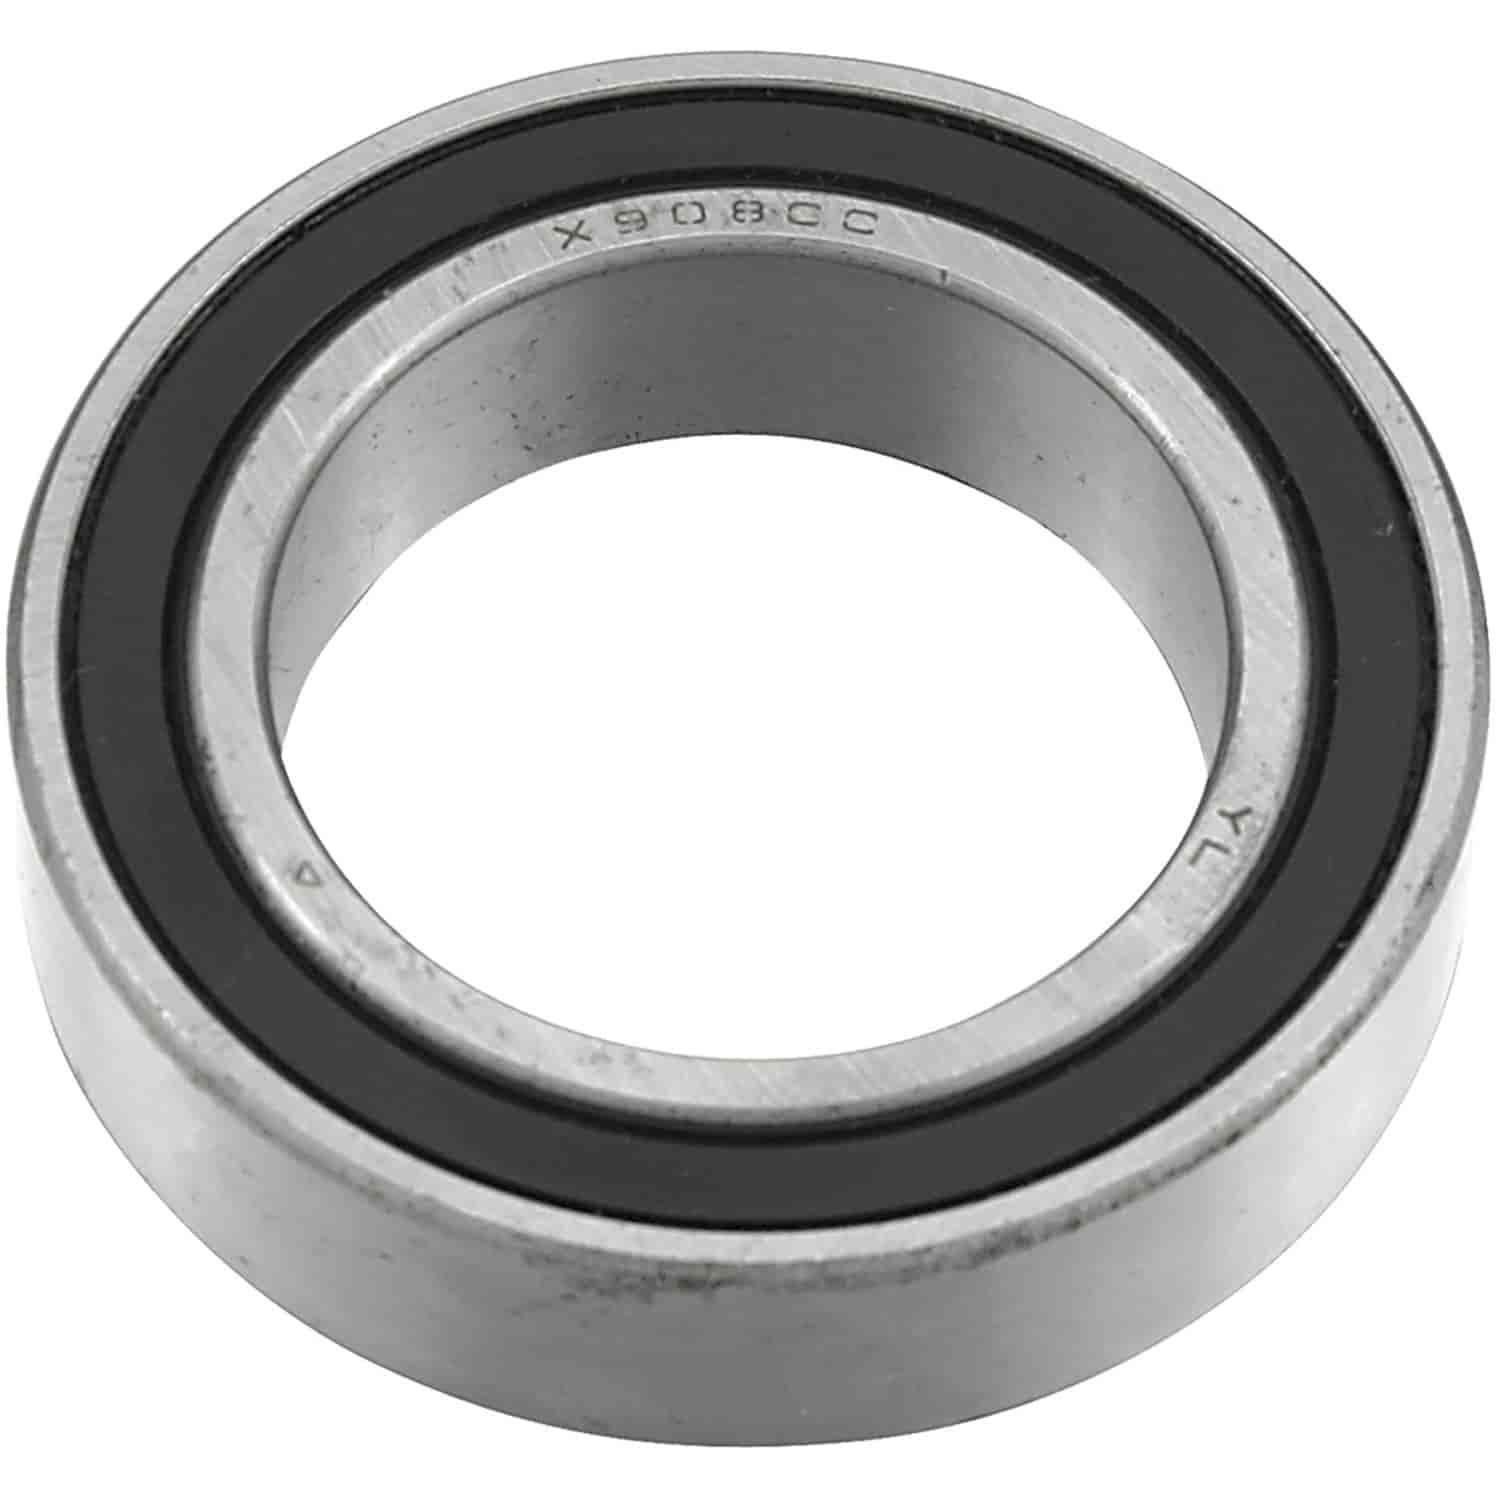 Driveshaft Support Bearing 1961-71 Buick/1957-64 Cadillac Center